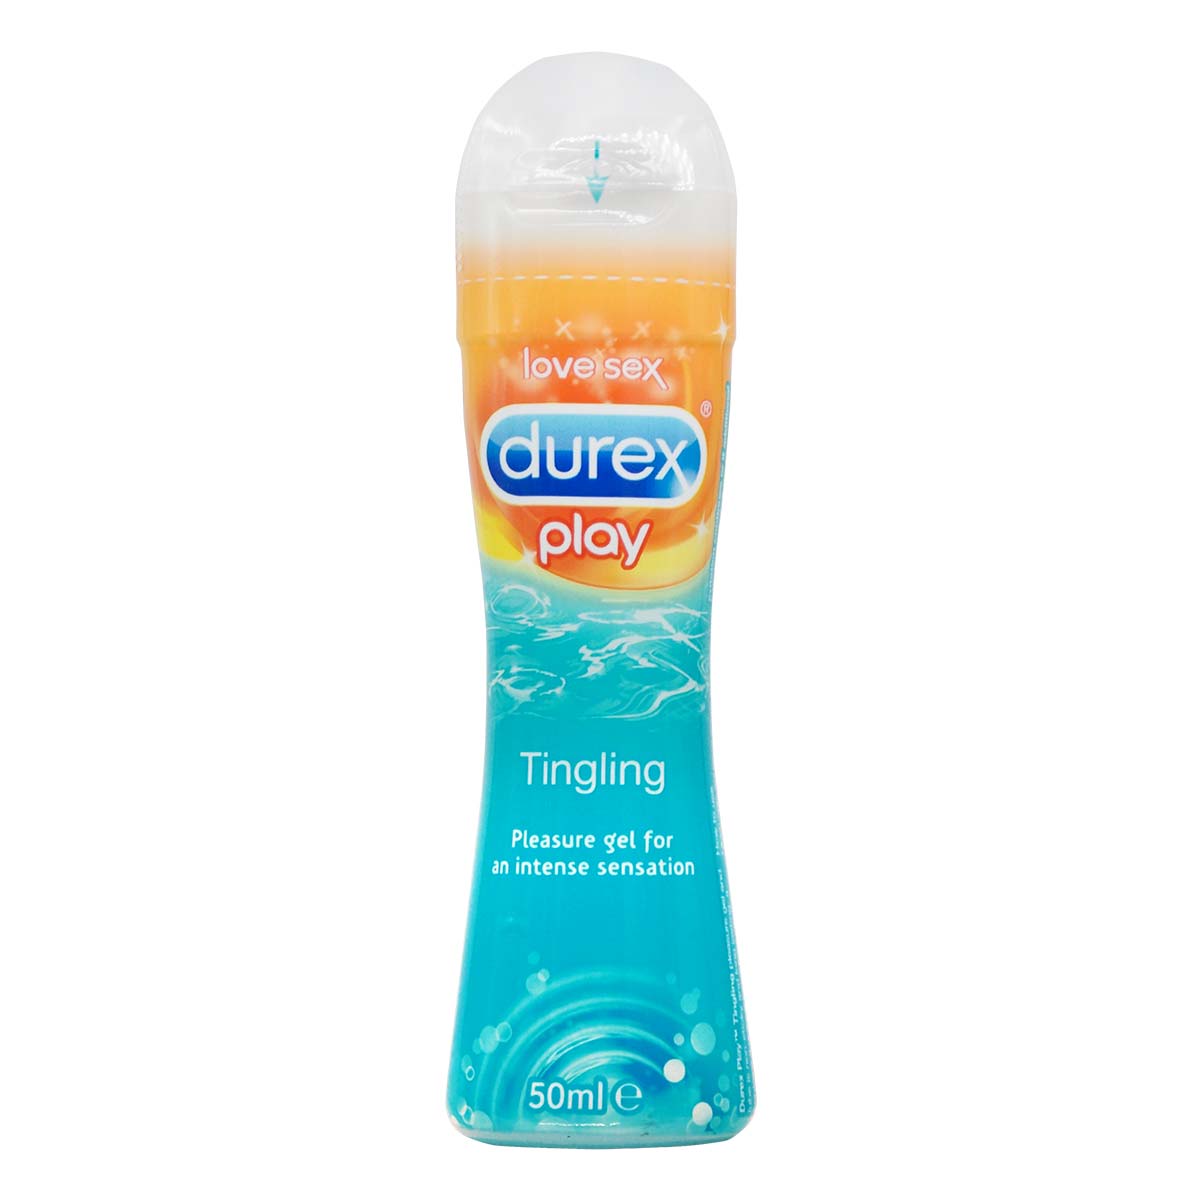 Durex Play Tingling Intimate Lube 50ml Water-based Lubricant-p_2